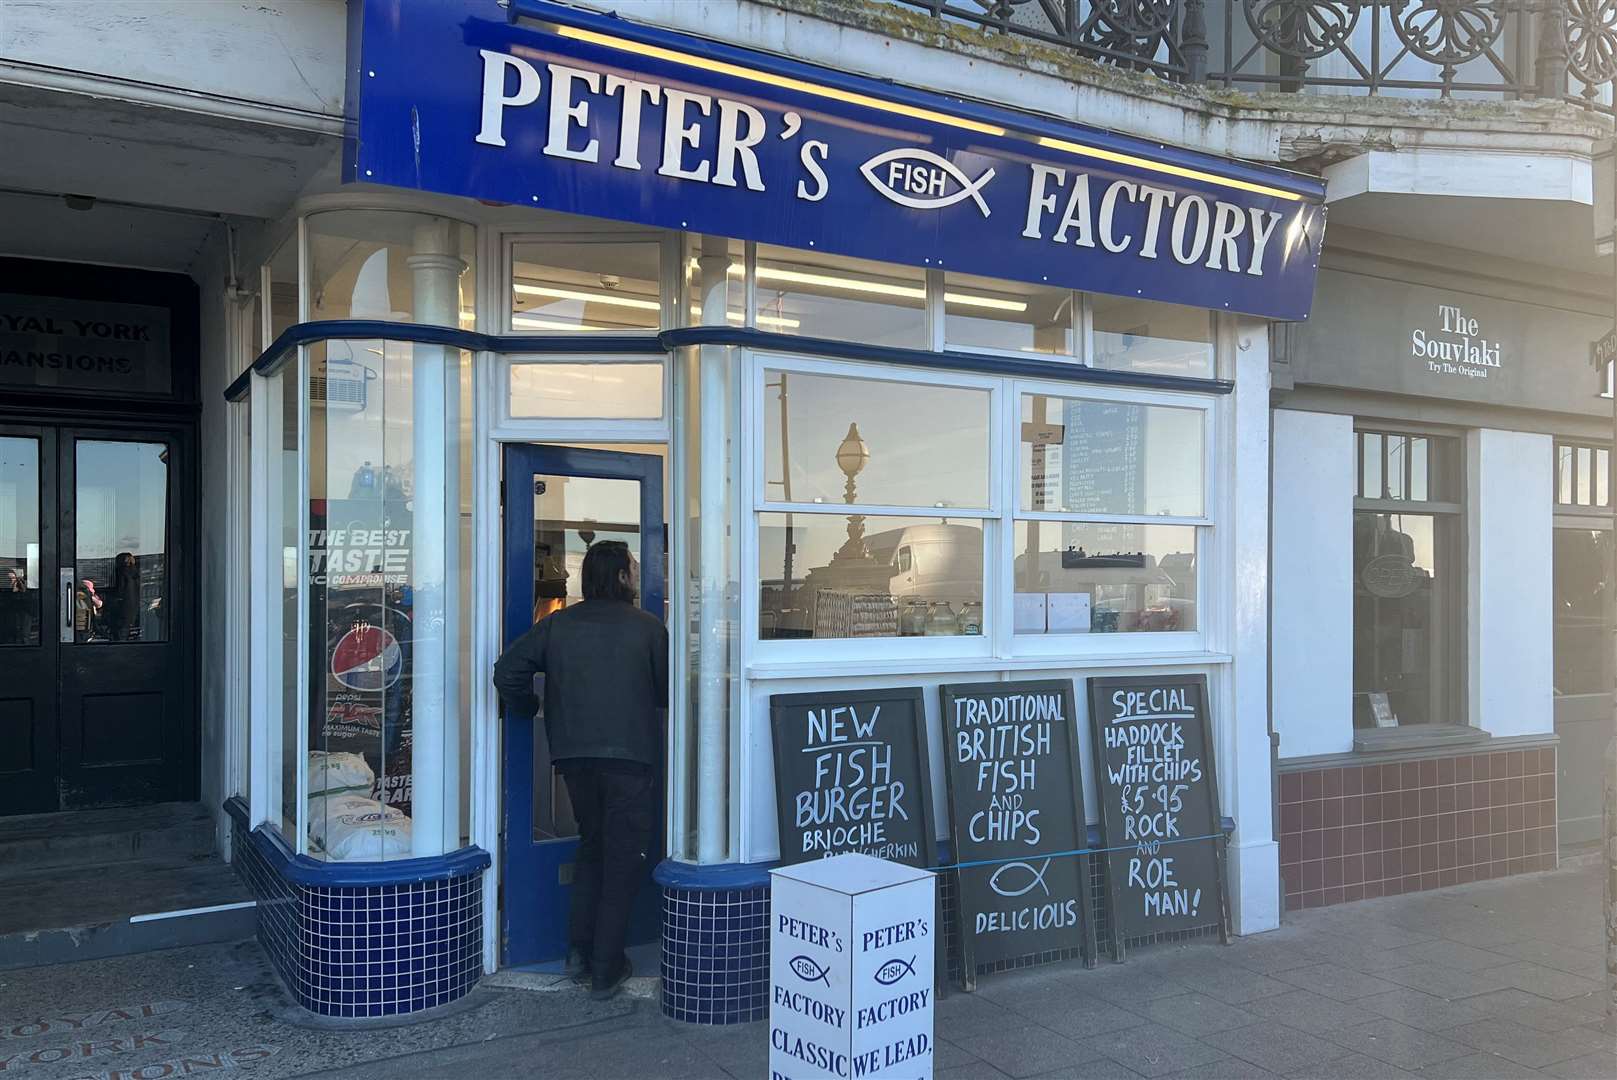 Peter's Fish Factory got a surprise mention during the show